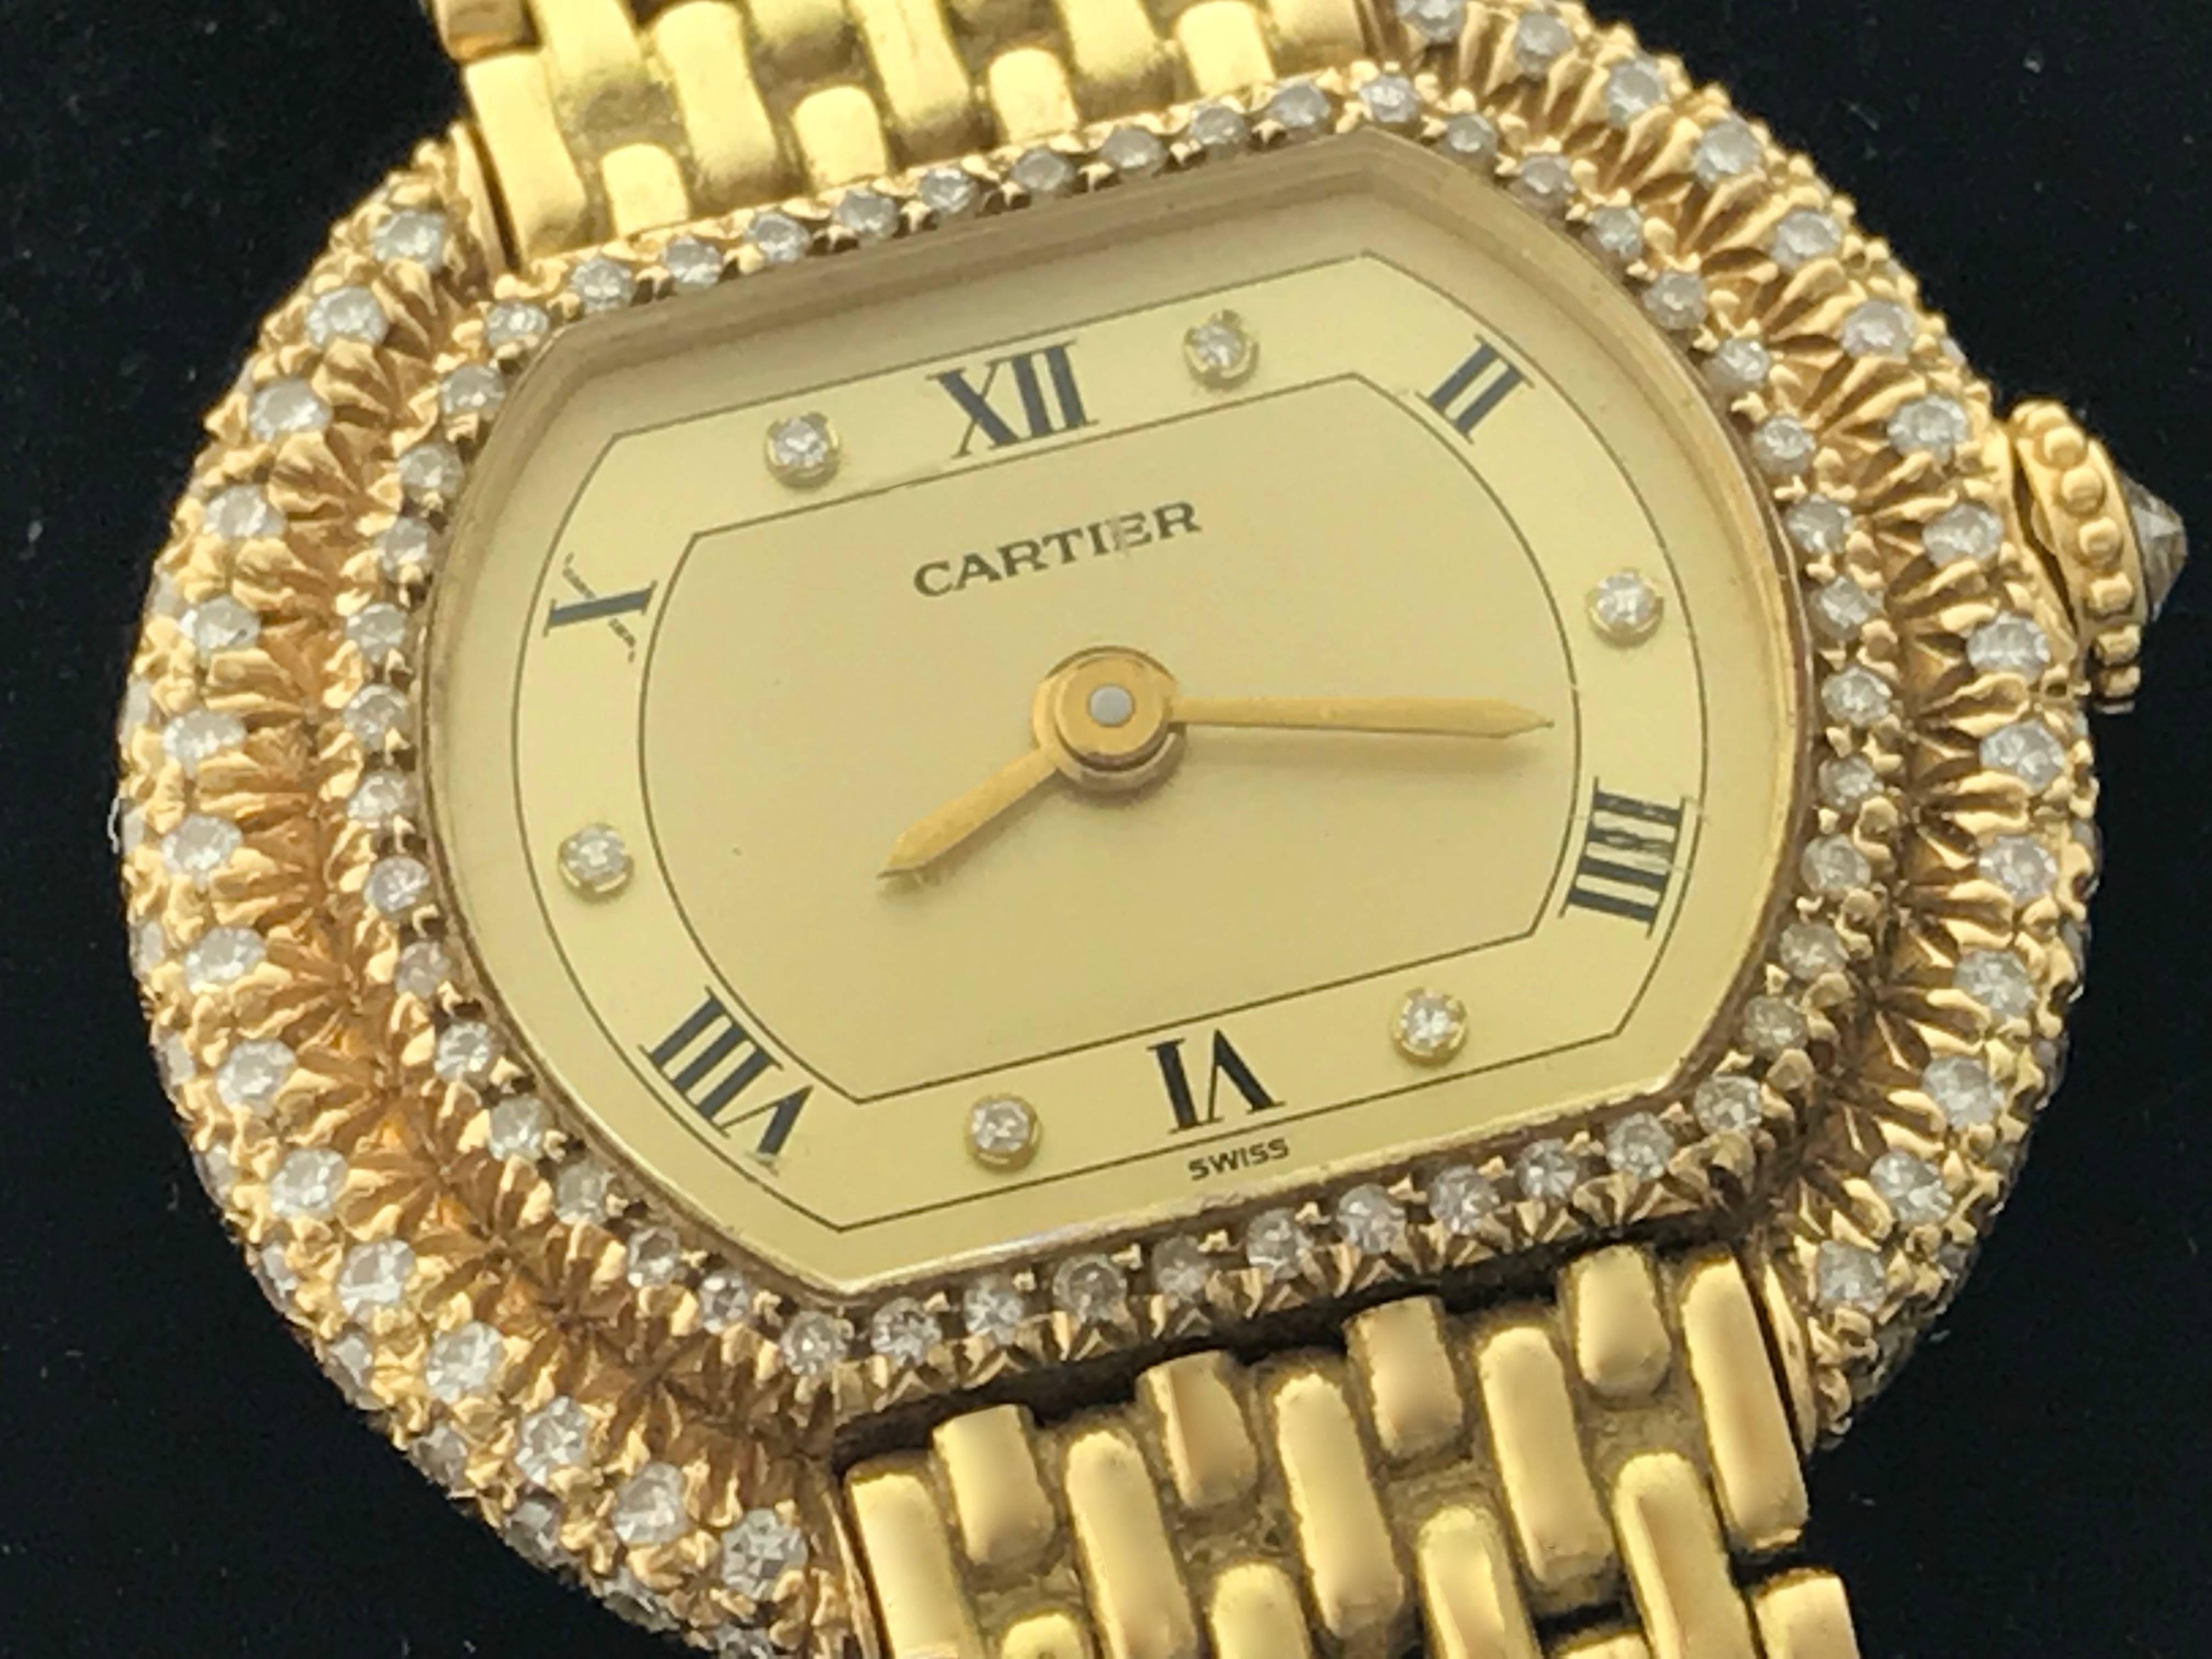 Cartier Pre Owned Ladies Manual Wind wrist watch. Gold Dial with black Roman numerals and Diamond hour markers. 18k Yellow Gold case with Cartier Two-Row Diamond bezel and Diamond cabochon winding/setting crown (24x24mm). 18k Yellow Gold Cartier